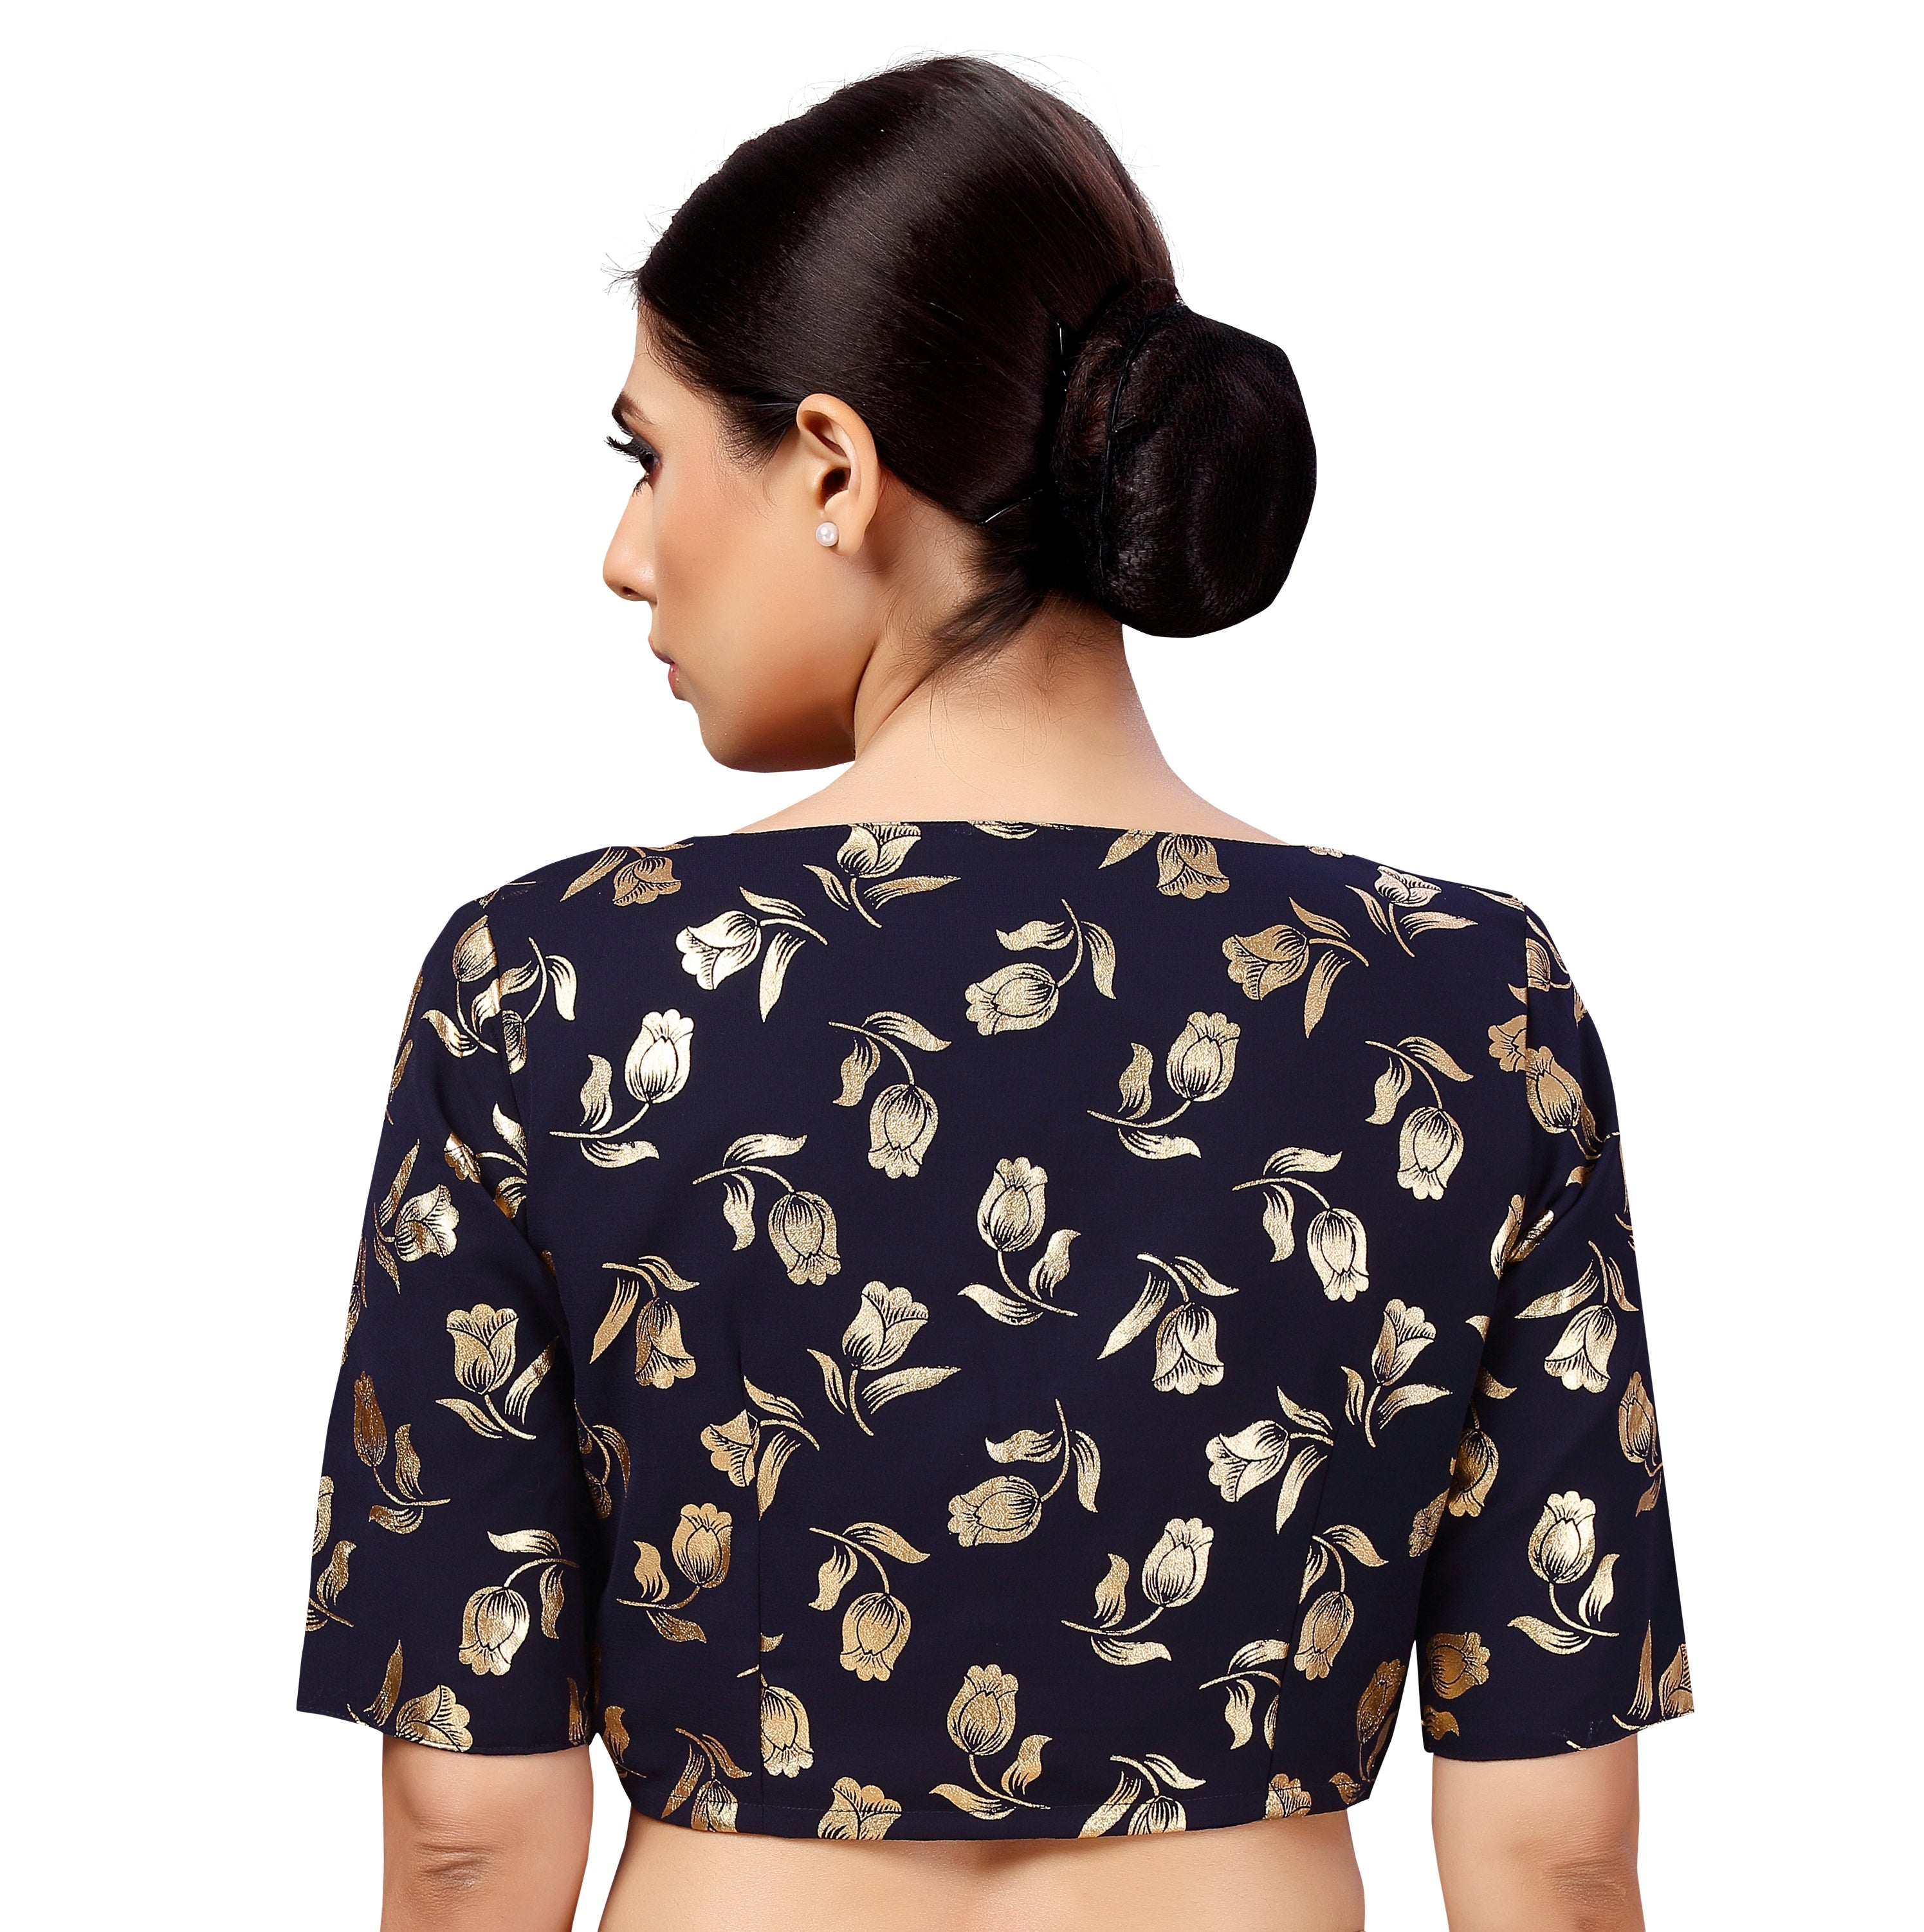 Women's Georgette Embroidered and Gold Printed Saree Blouse. - Shringaar